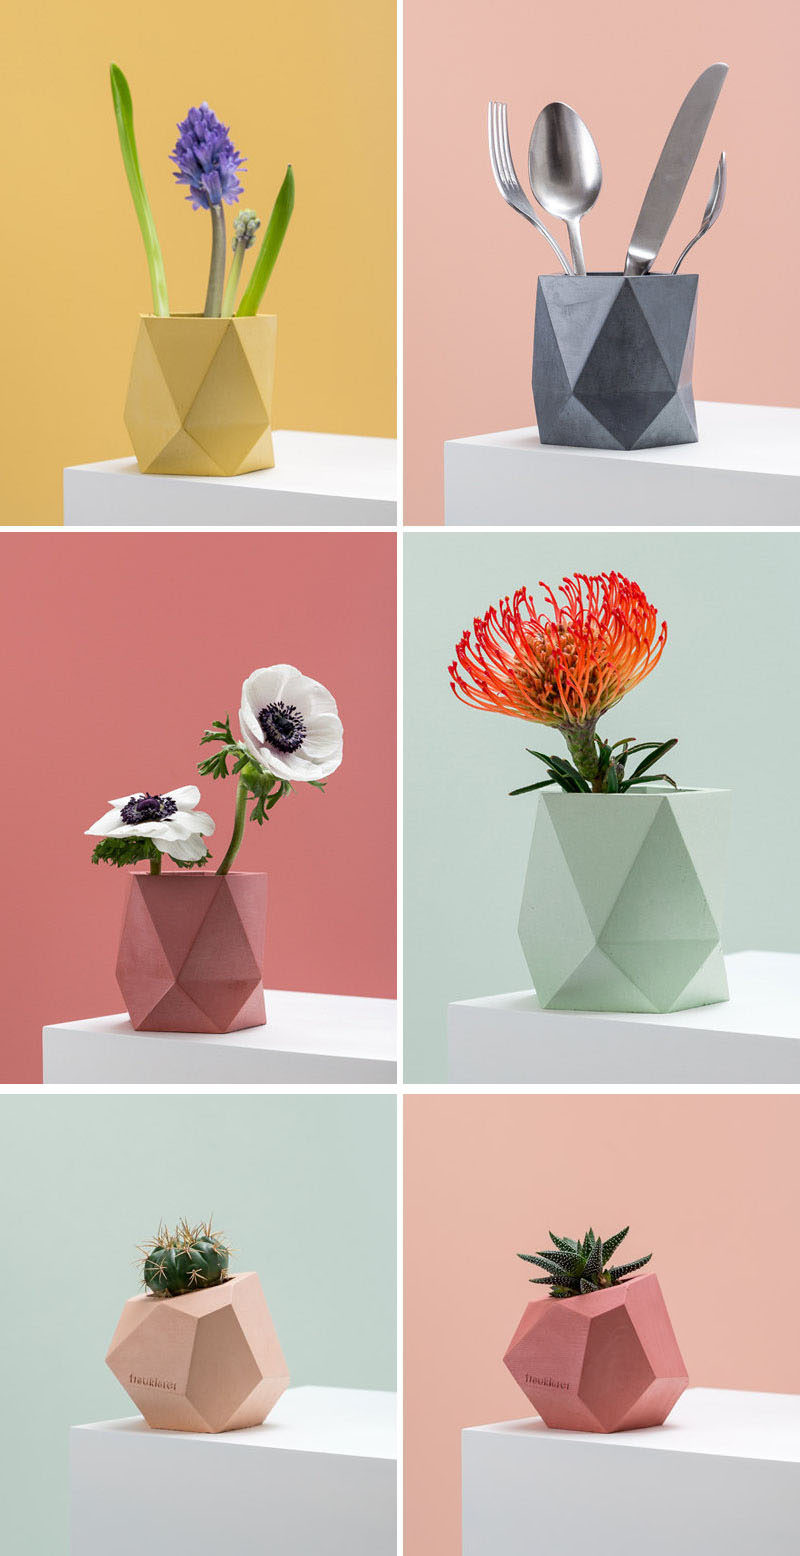 Austrian designer Klara Schuster, has created a collection of colorful concrete planters and vases that add a modern geometric look to your home decor.